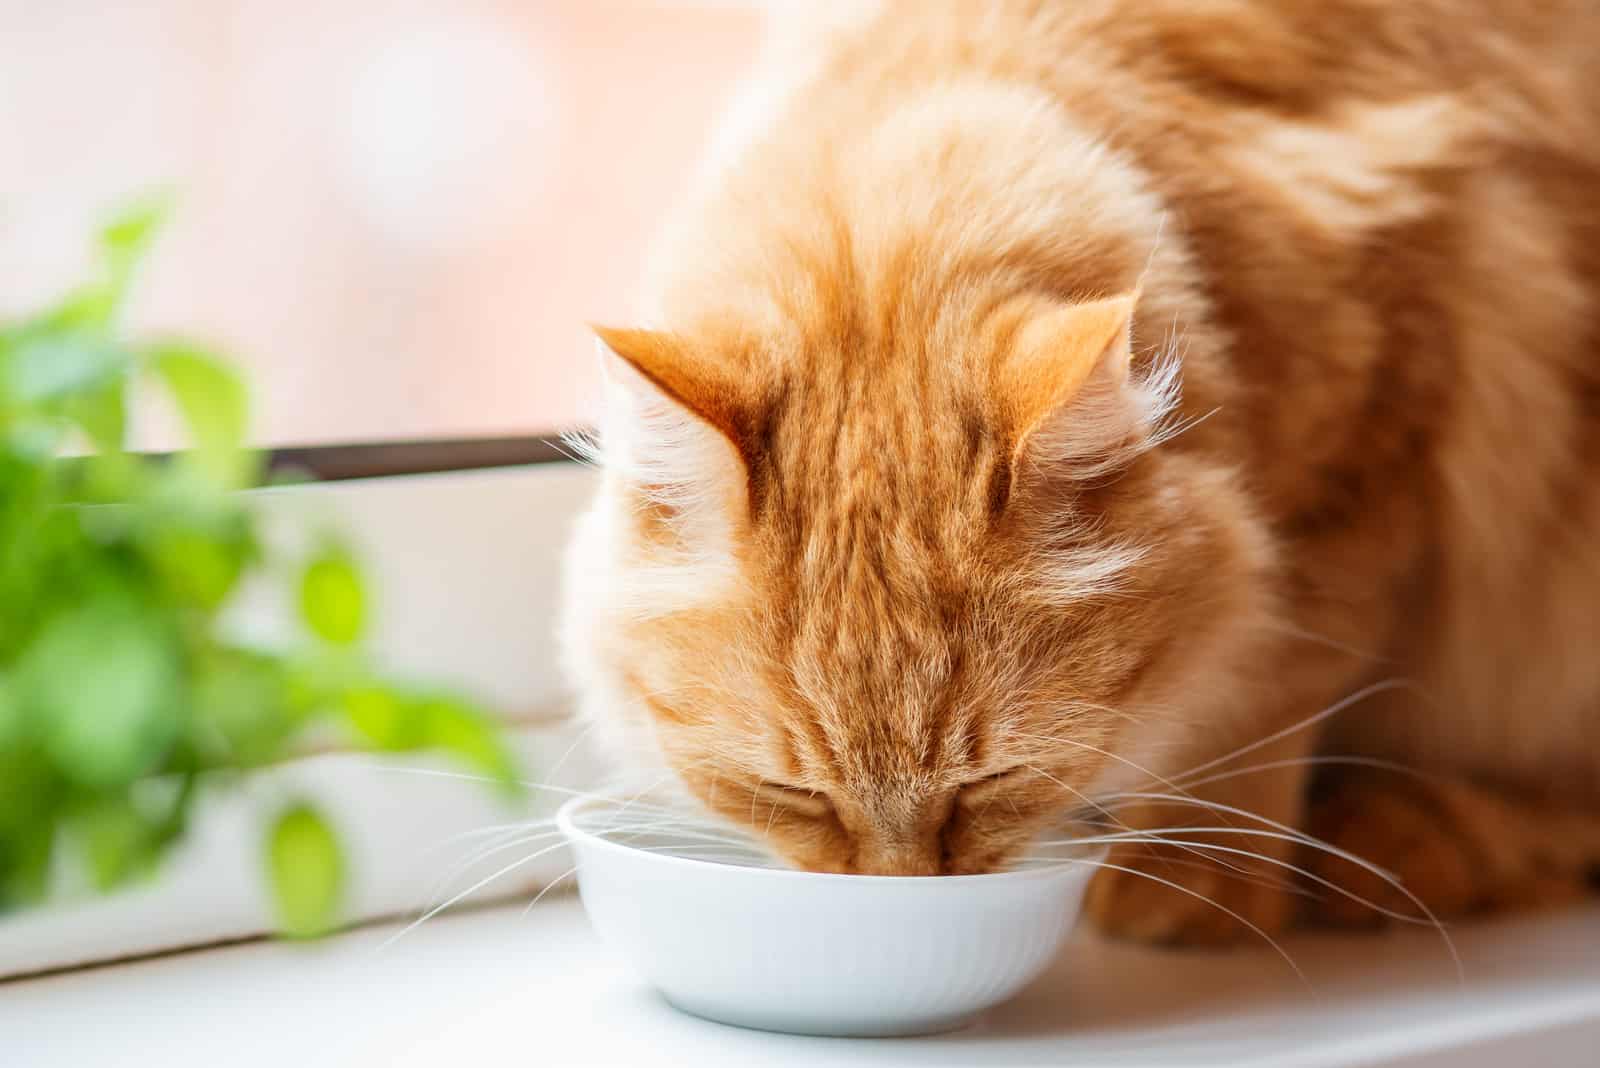 the cat drinks from a bowl